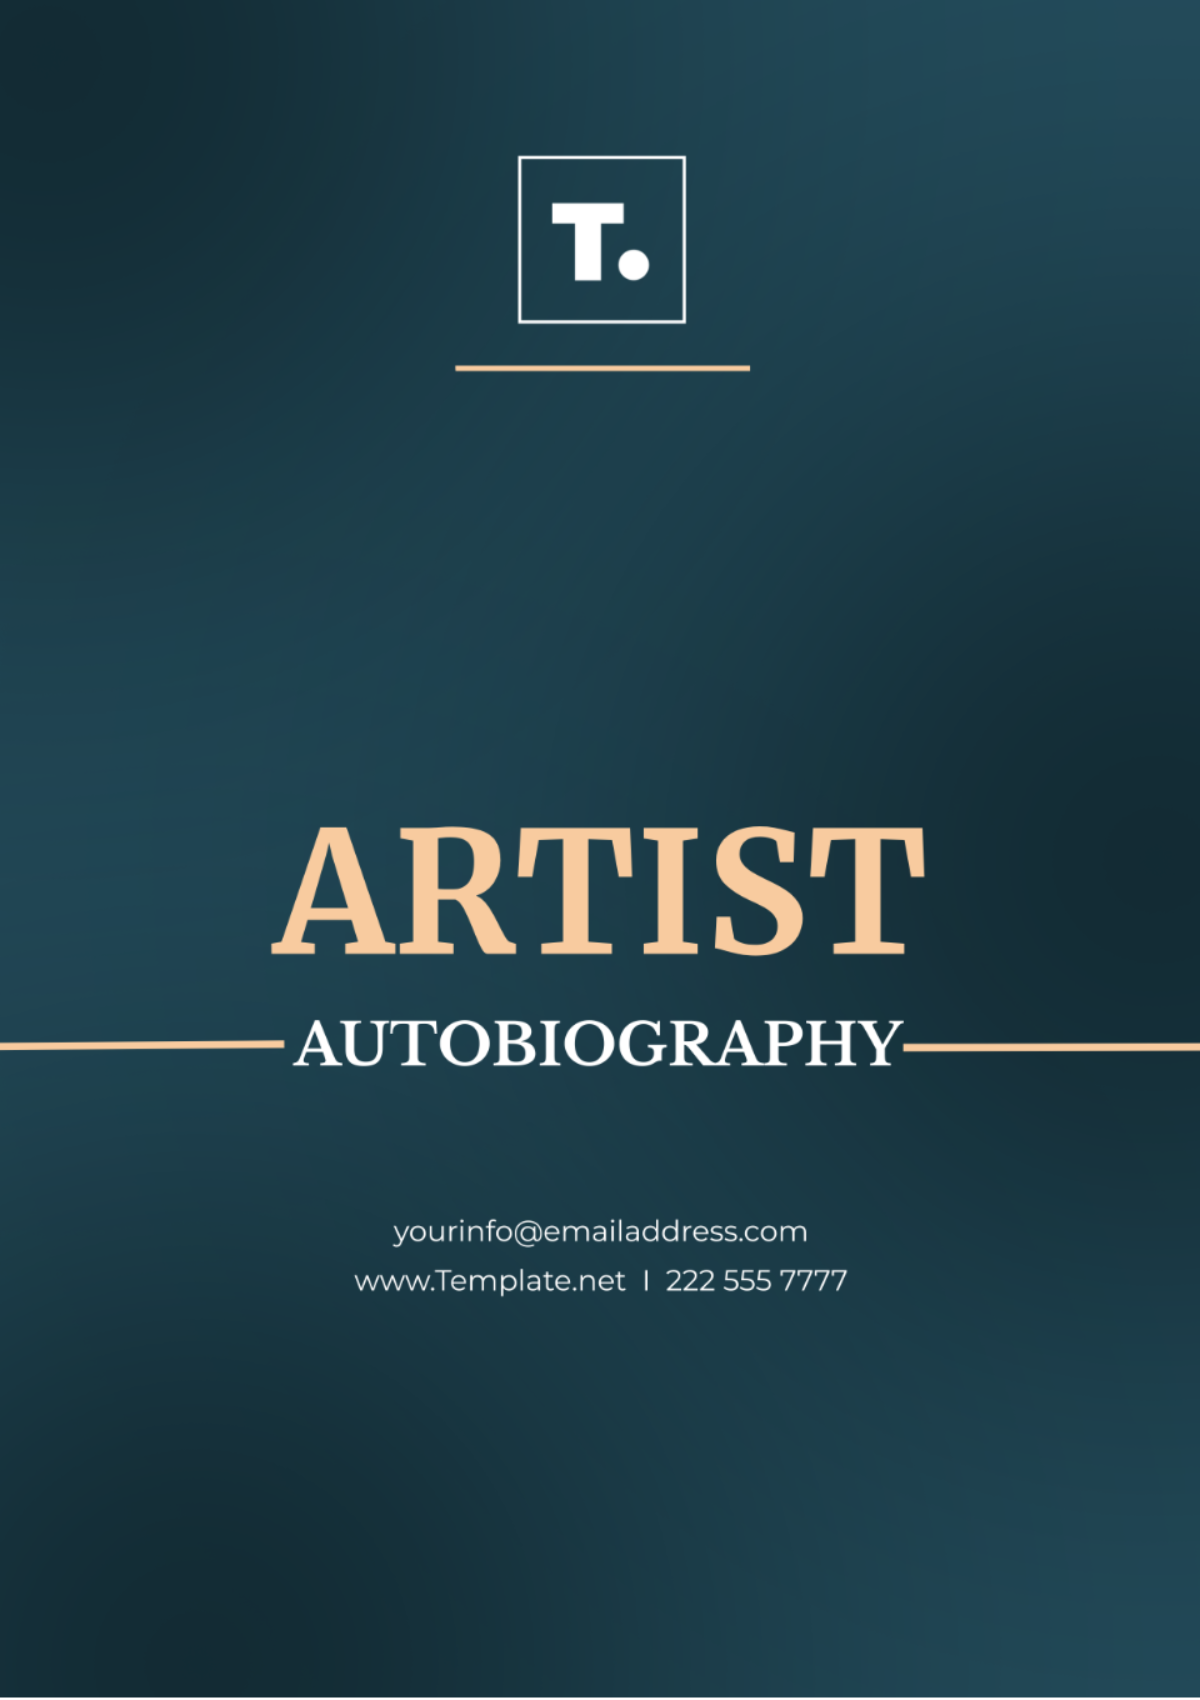 Free Artist Autobiography Template